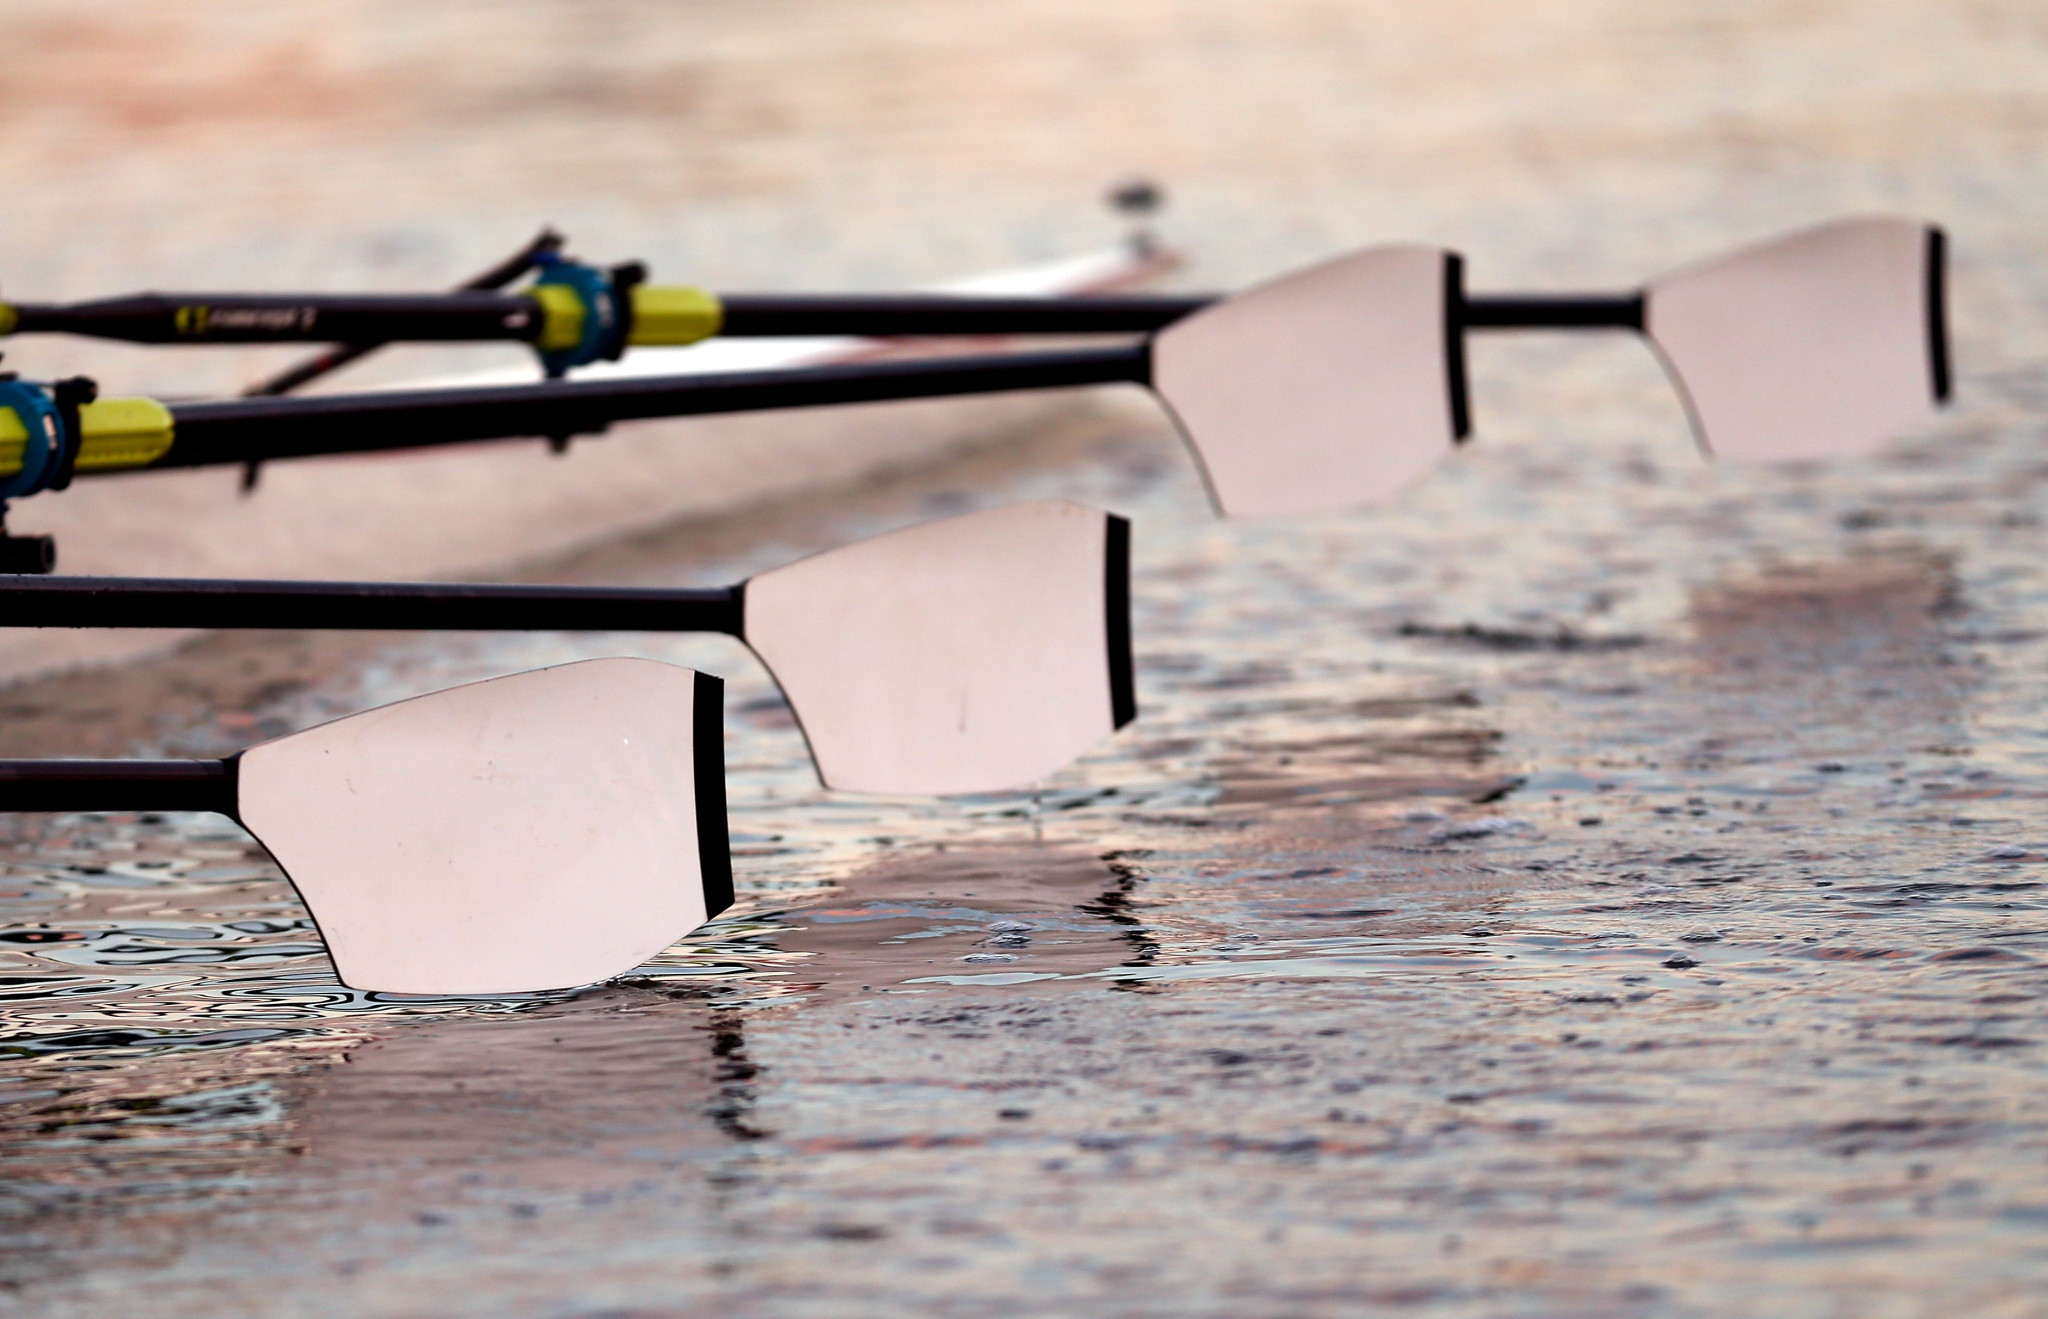 World Rowing is pushing for the inclusion of beach sprint at the 2028 Olympics in Los Angeles ©Getty Images